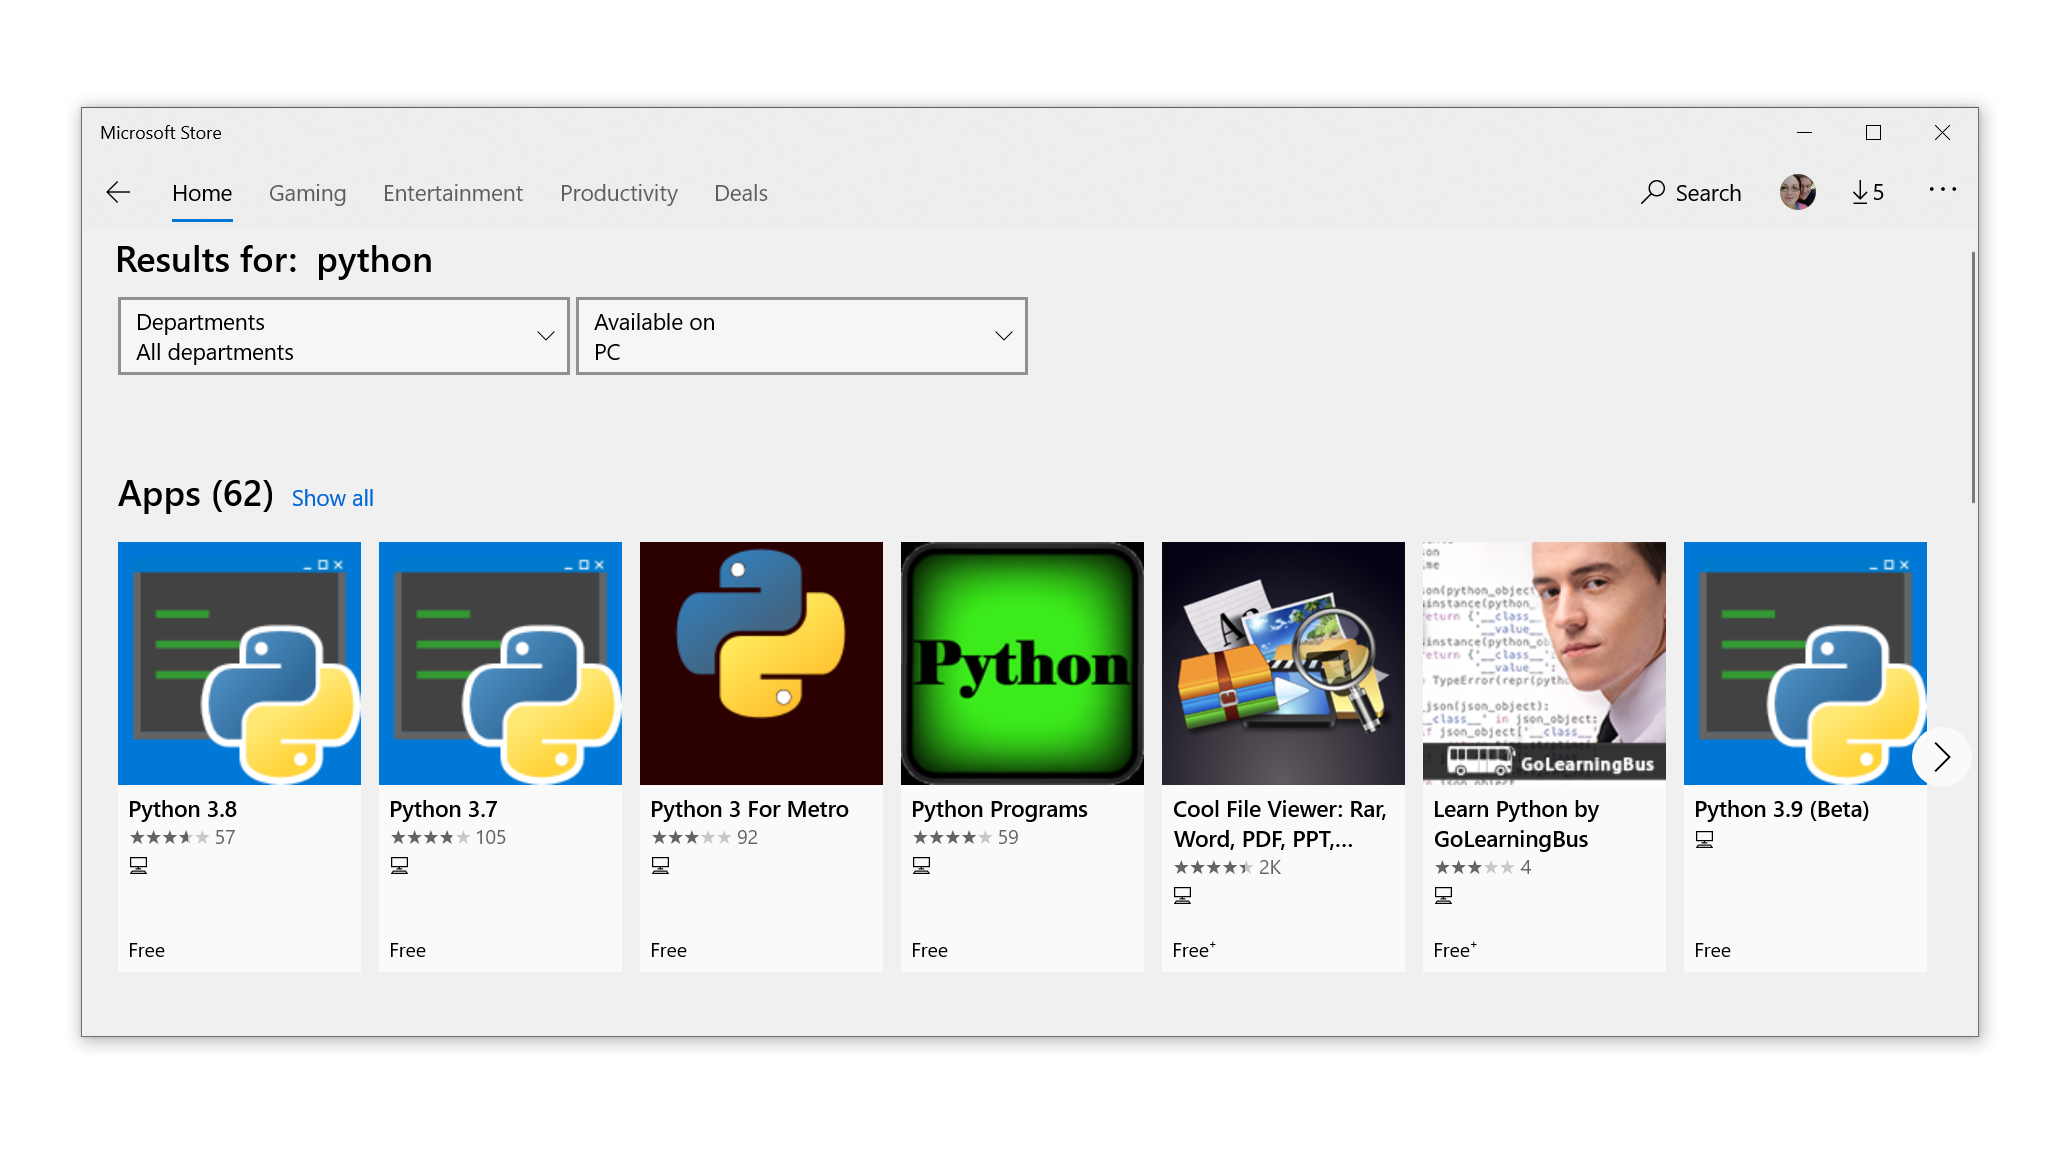 The Microsoft Store search results for "Python"